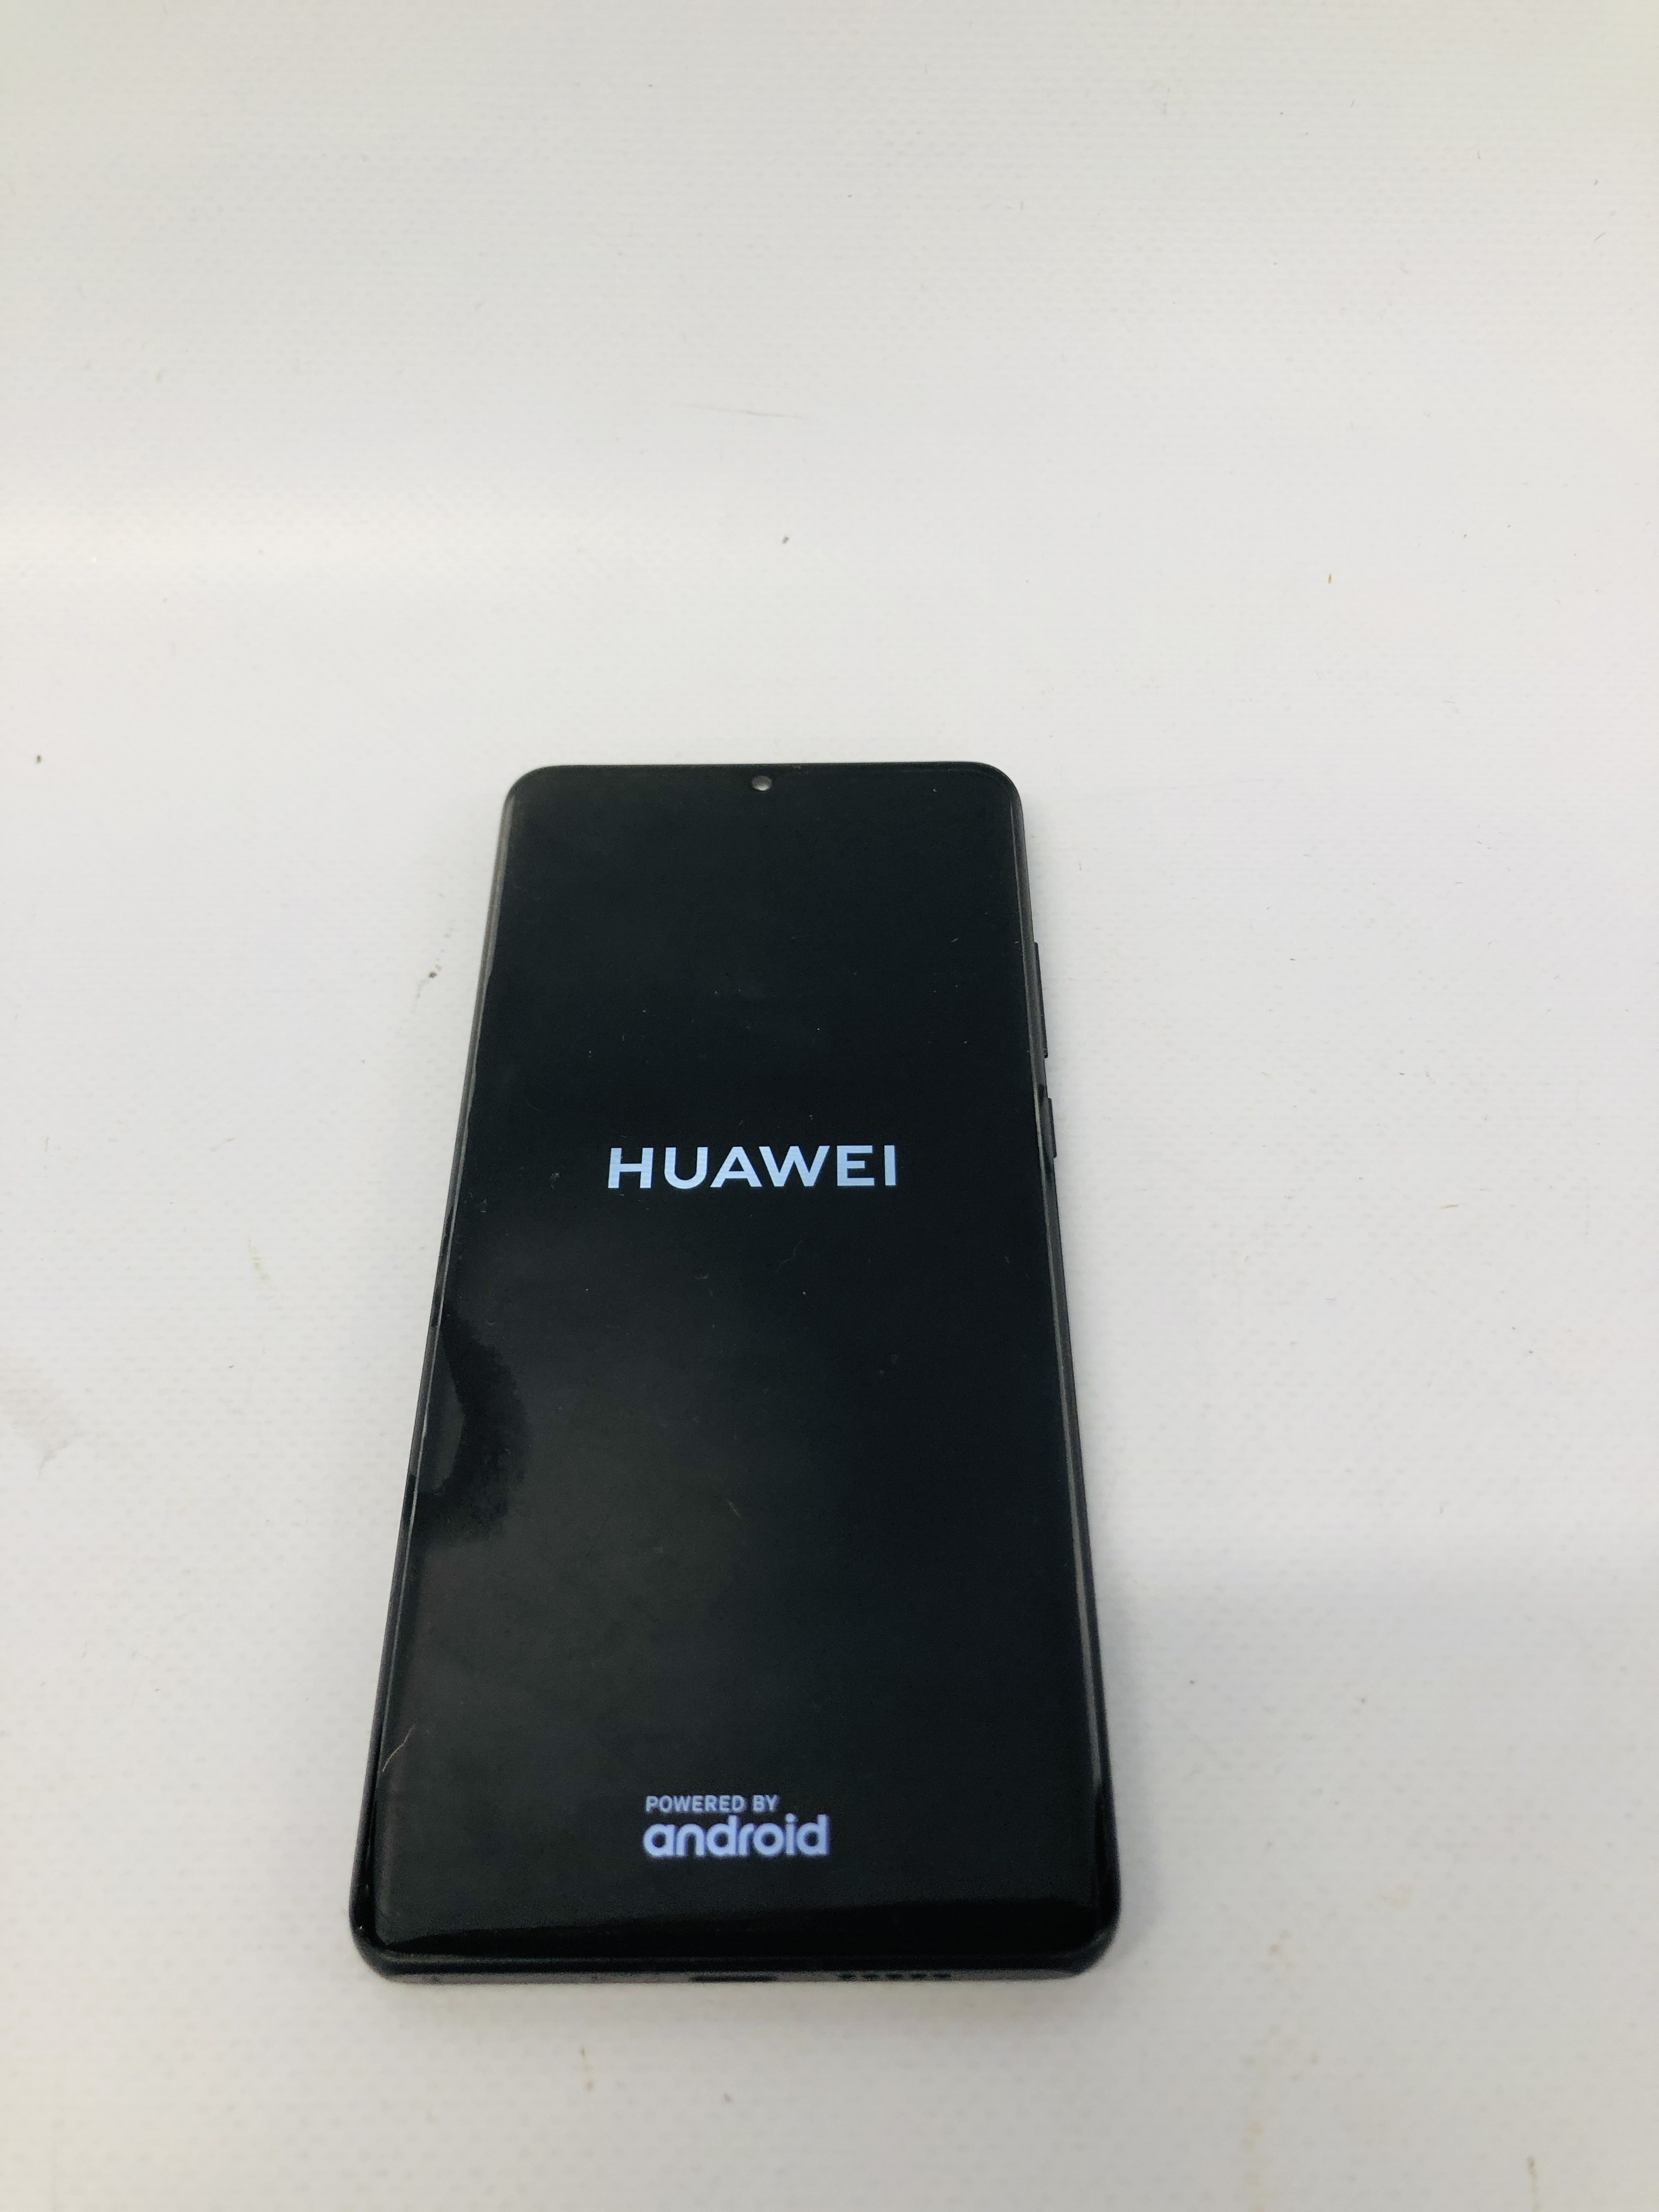 A HUAWEI VOG-L09 SMARTPHONE - SOLD AS SEEN - NO GUARANTEE OF CONNECTIVITY